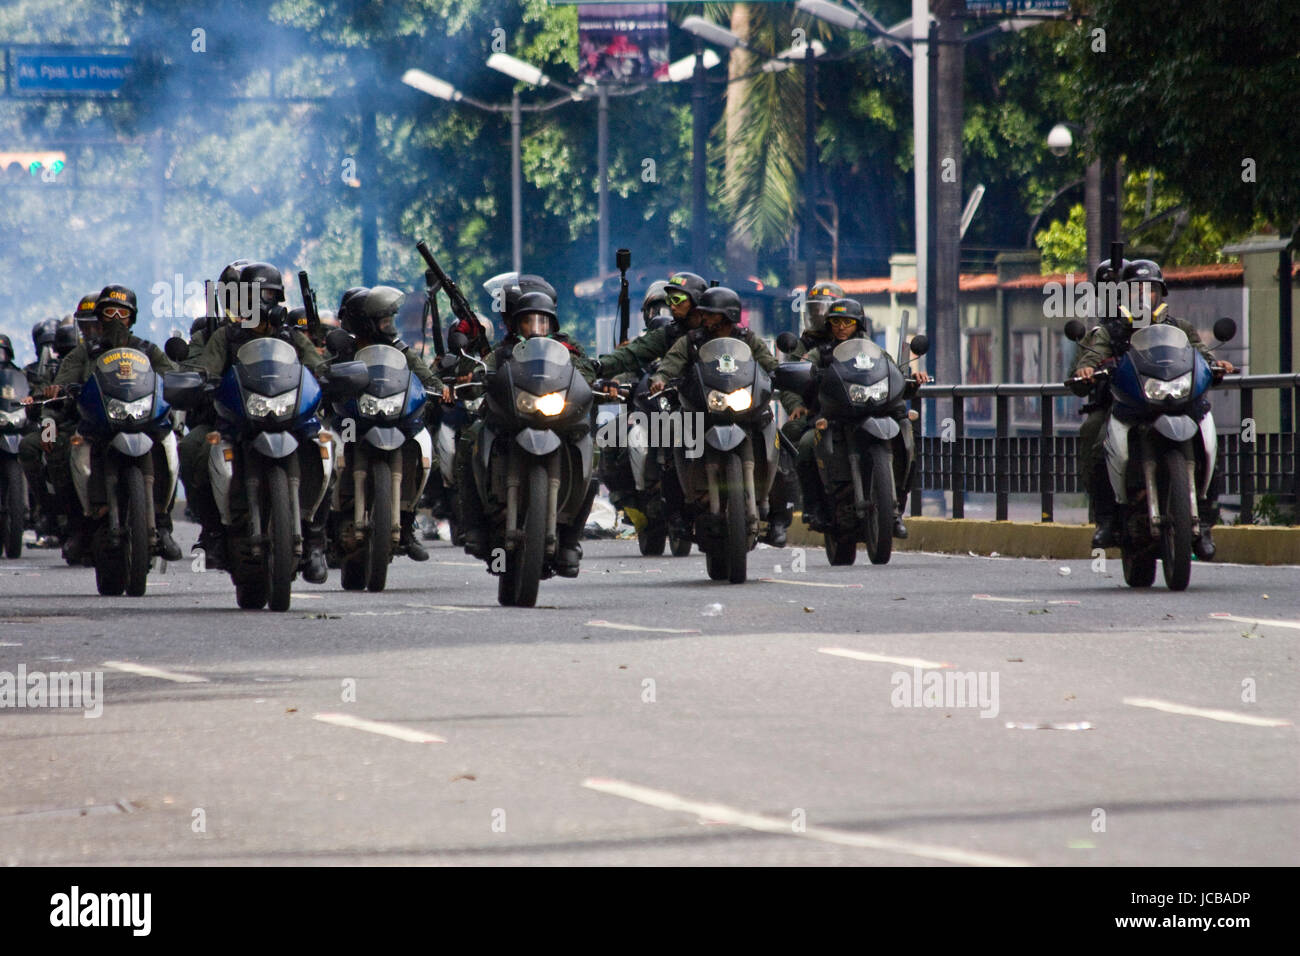 Members of the Bolivarian National Guard of Venezuela patrol a street after disperse a protest against the government of Nicolas Maduro. Stock Photo